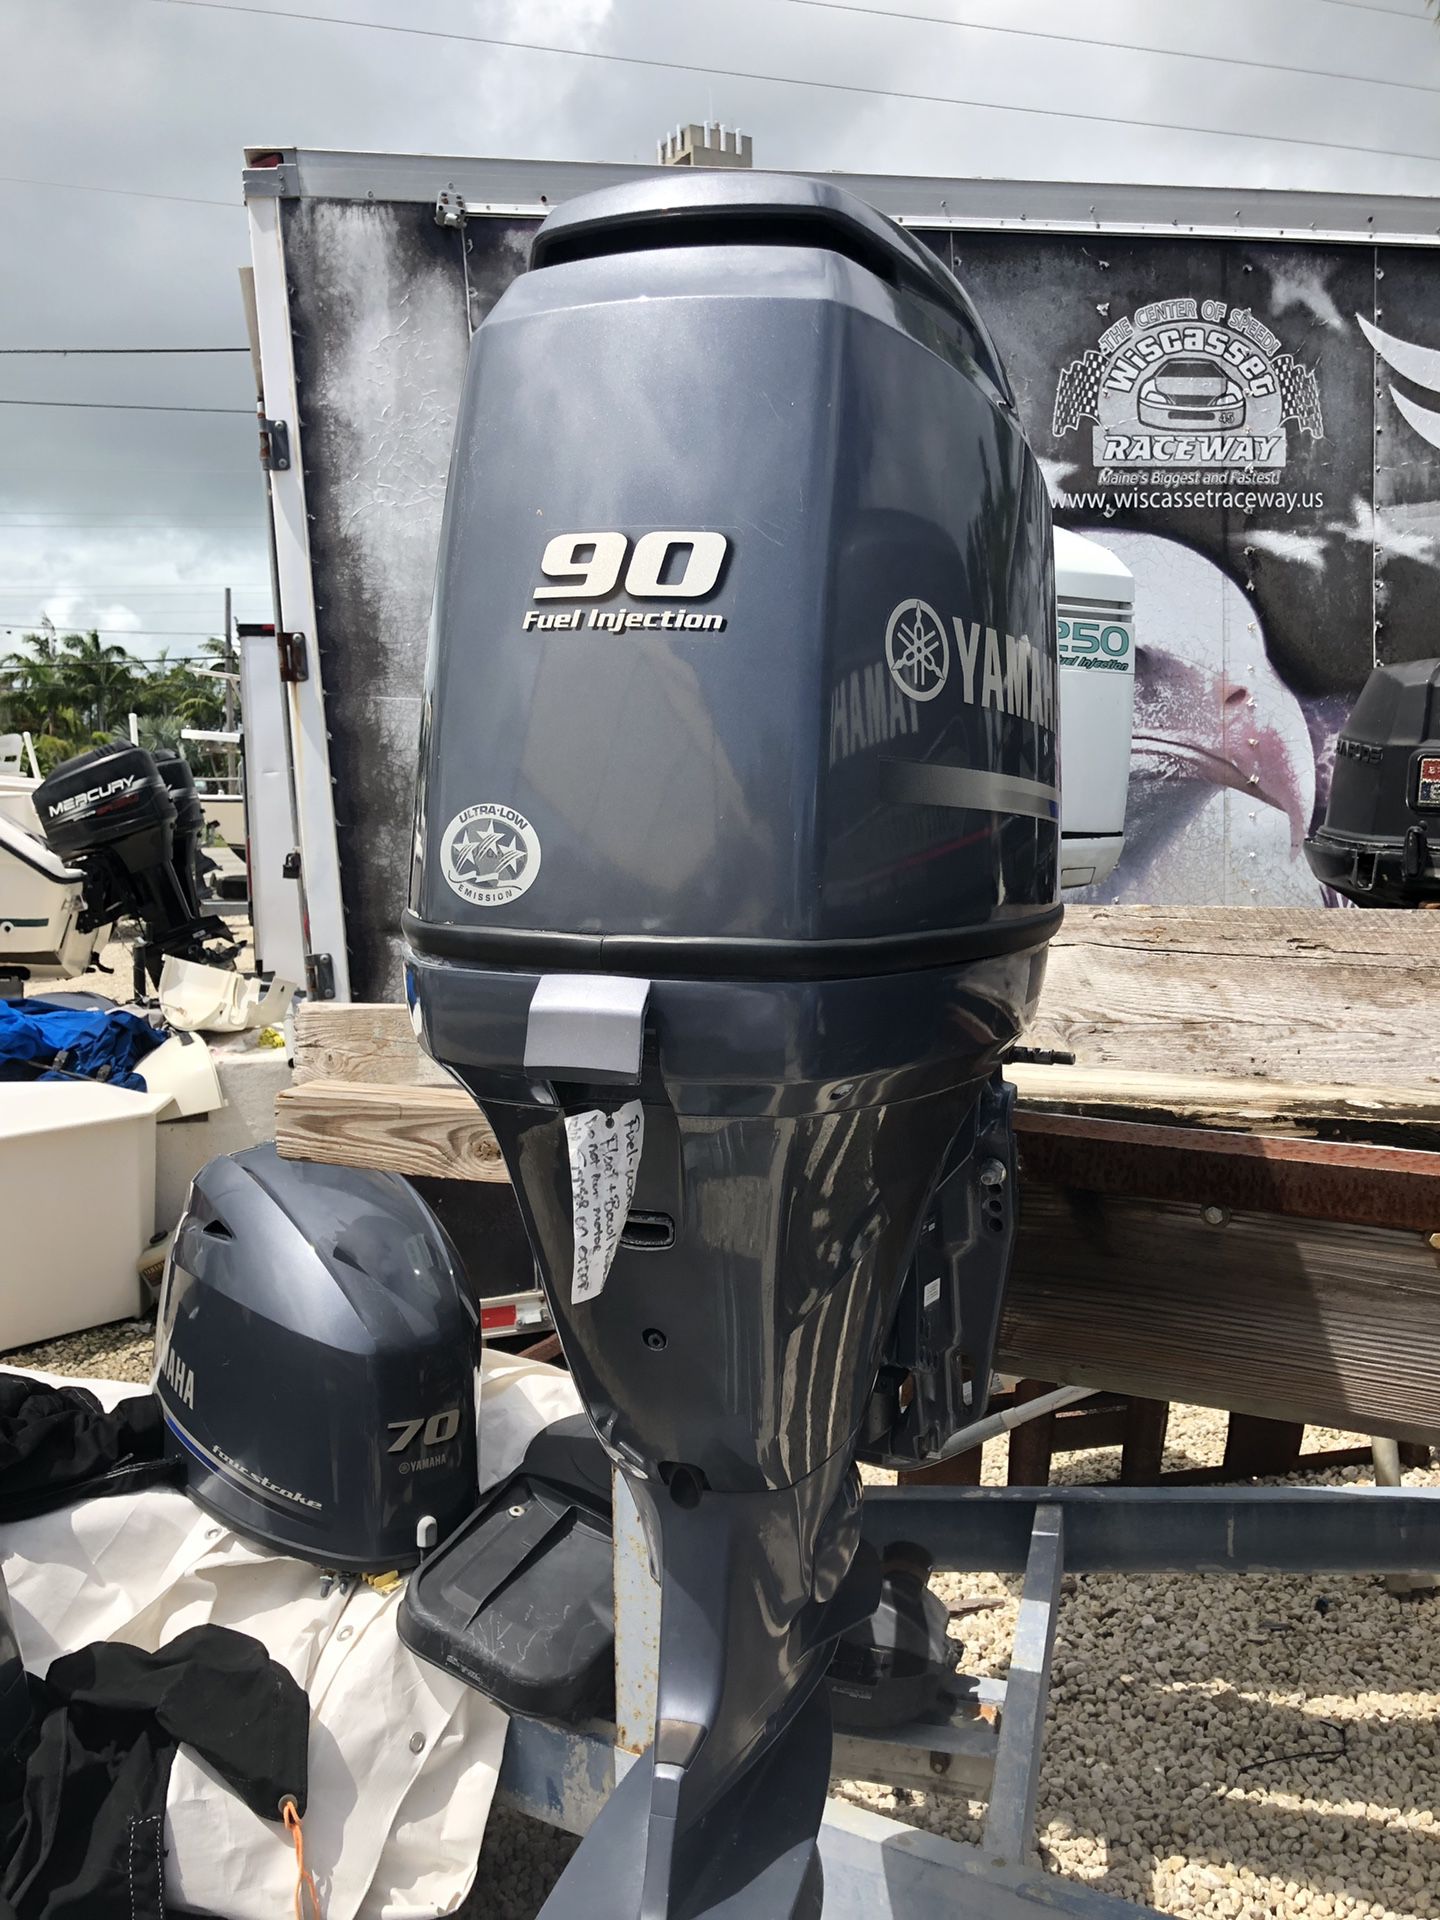 NICE 2013 YAMAHA F 90 hp 4-stroke new ll perfect !! come in @9am we can pull your old motor mount & go in the wate check out our wide selection